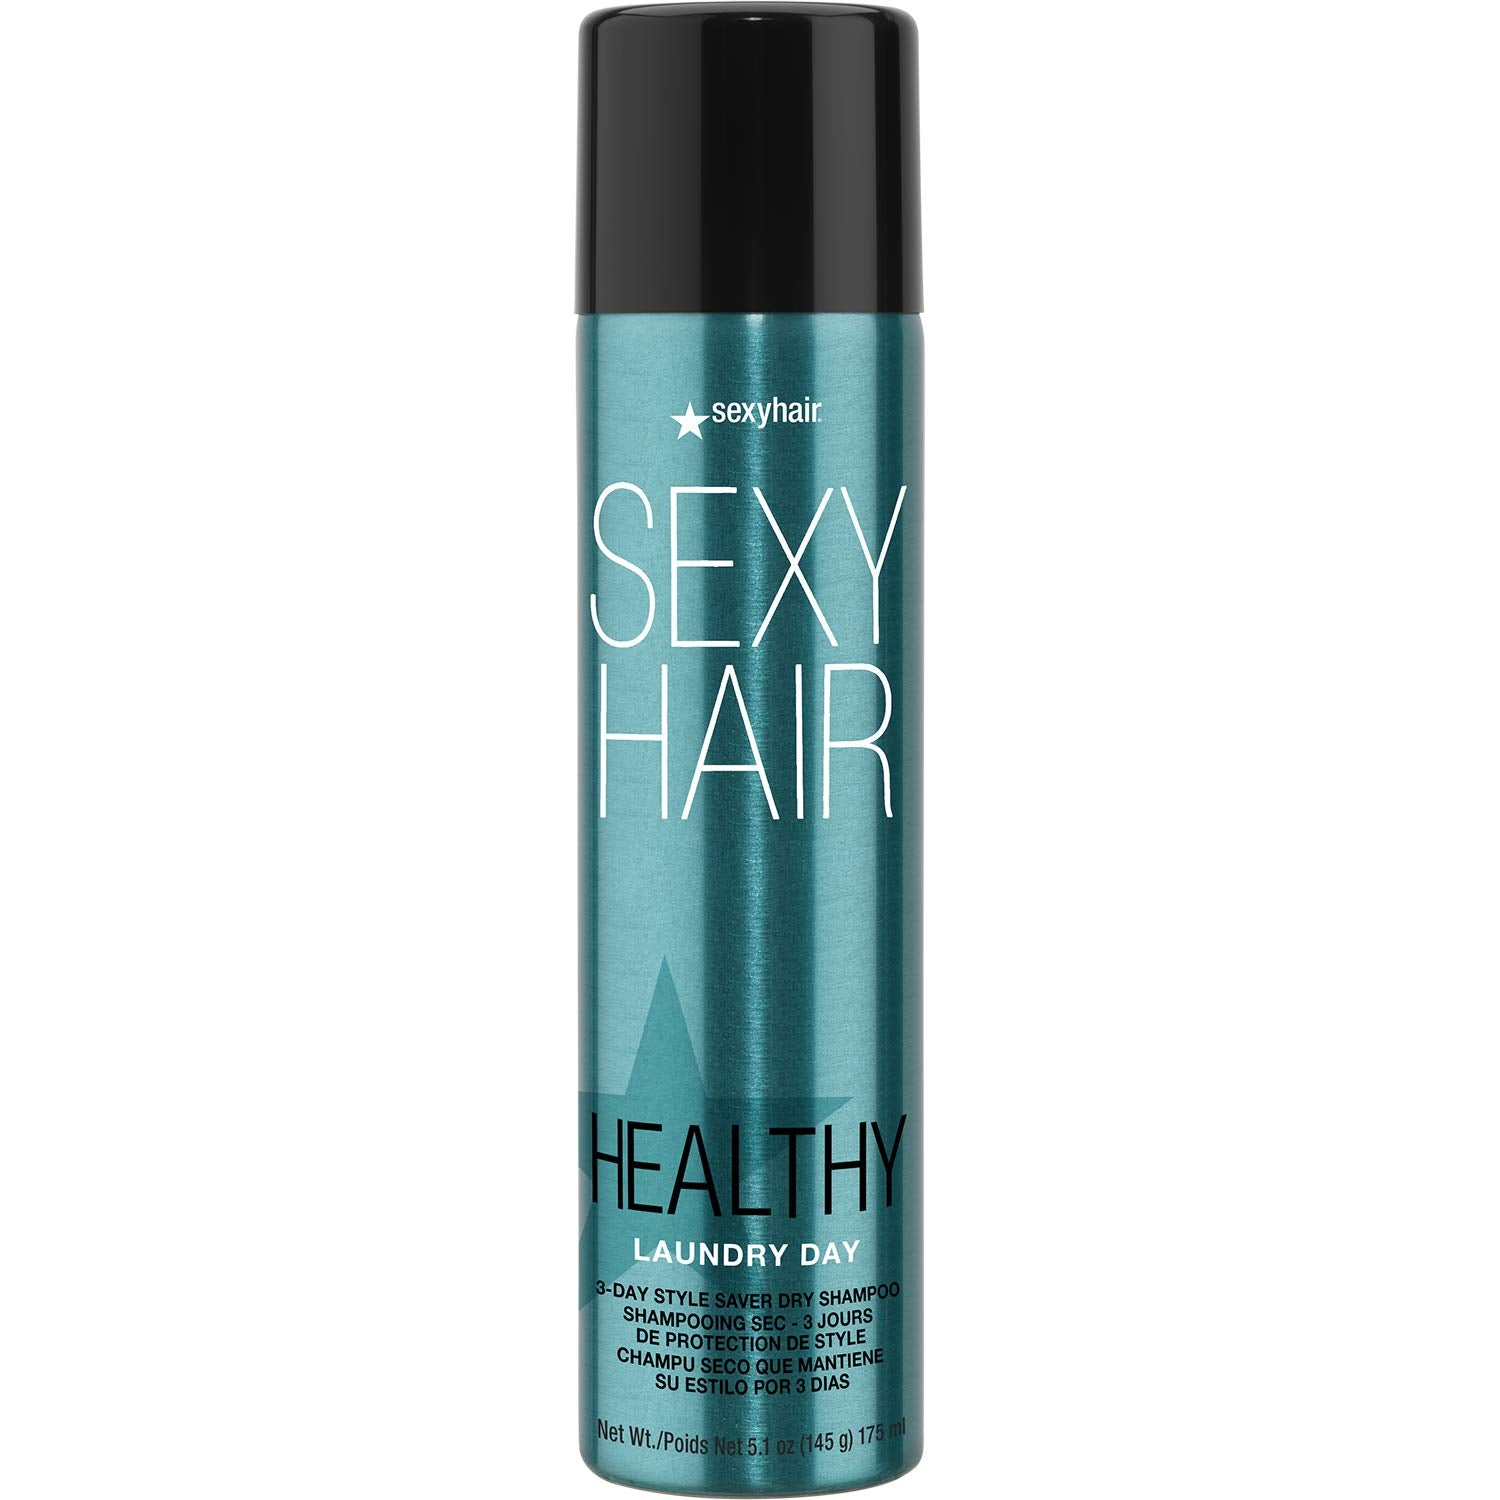 SexyHair Healthy Laundry Day 3-Day Style Saver Dry Shampoo - 5.1 oz (Buy 3 Get 1 Free Mix & Match)